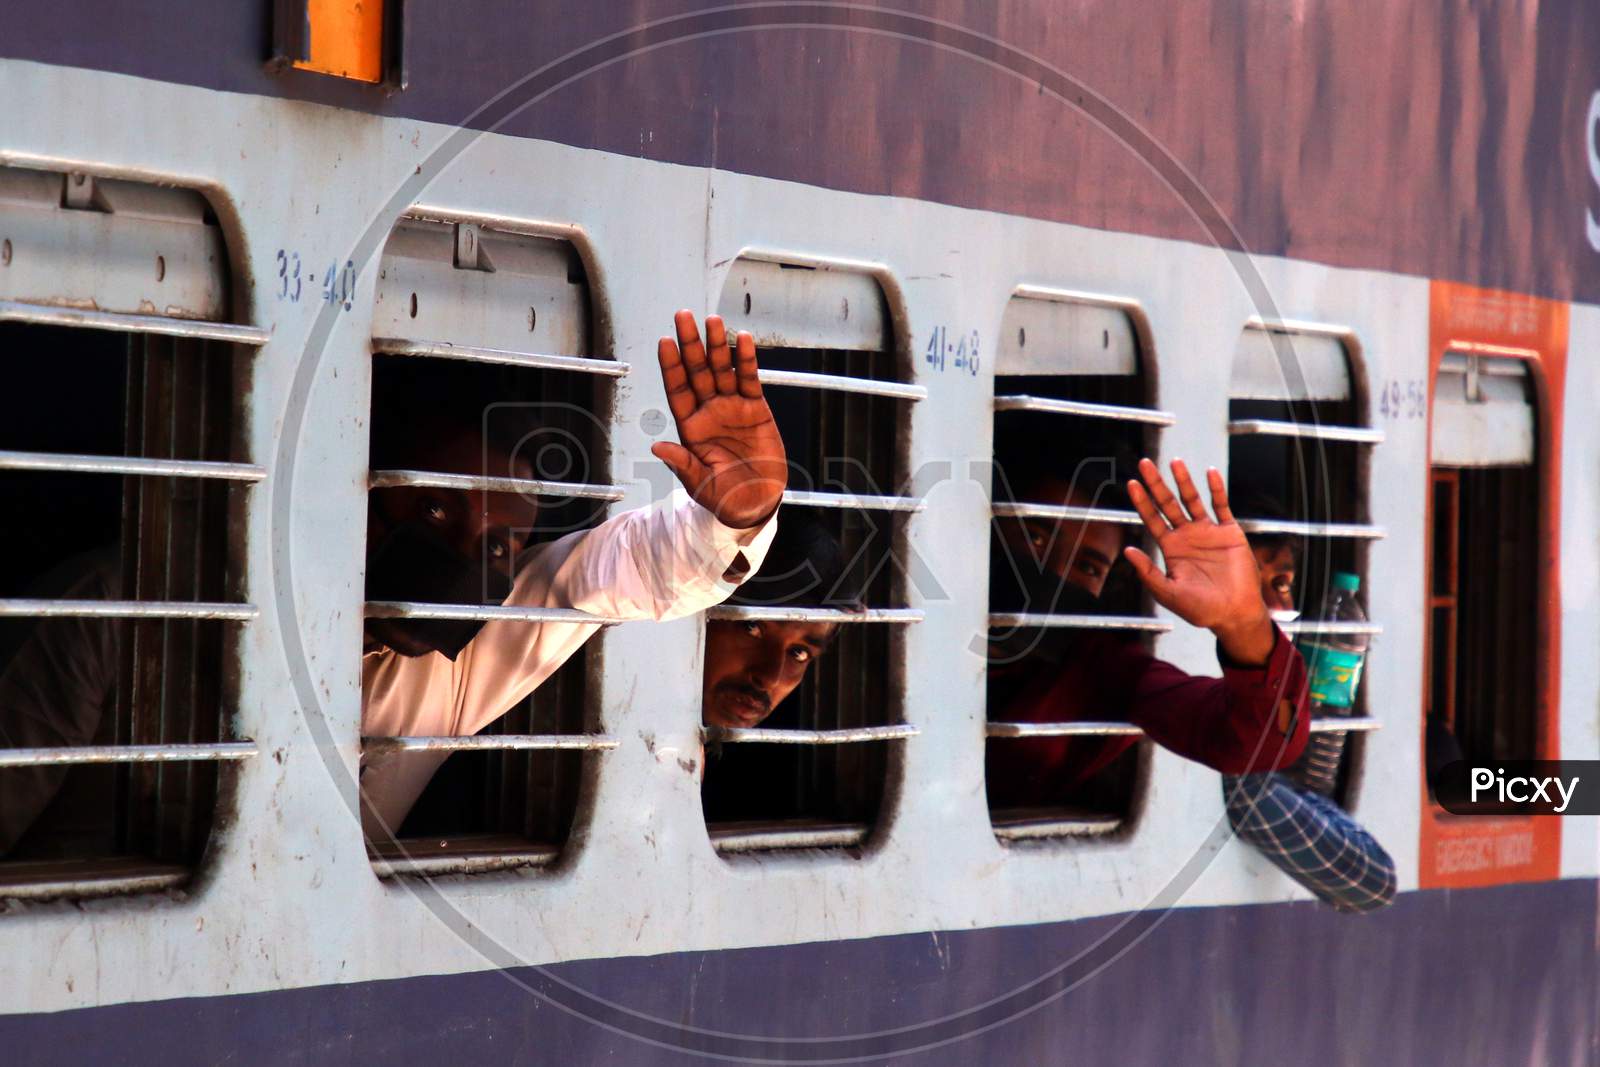 Stranded migrants wave as they board a special train to Bihar State from Ajmer railway station during a government-imposed nationwide lockdown as a preventive measure against the COVID-19 coronavirus, in Ajmer on May 13, 2020.